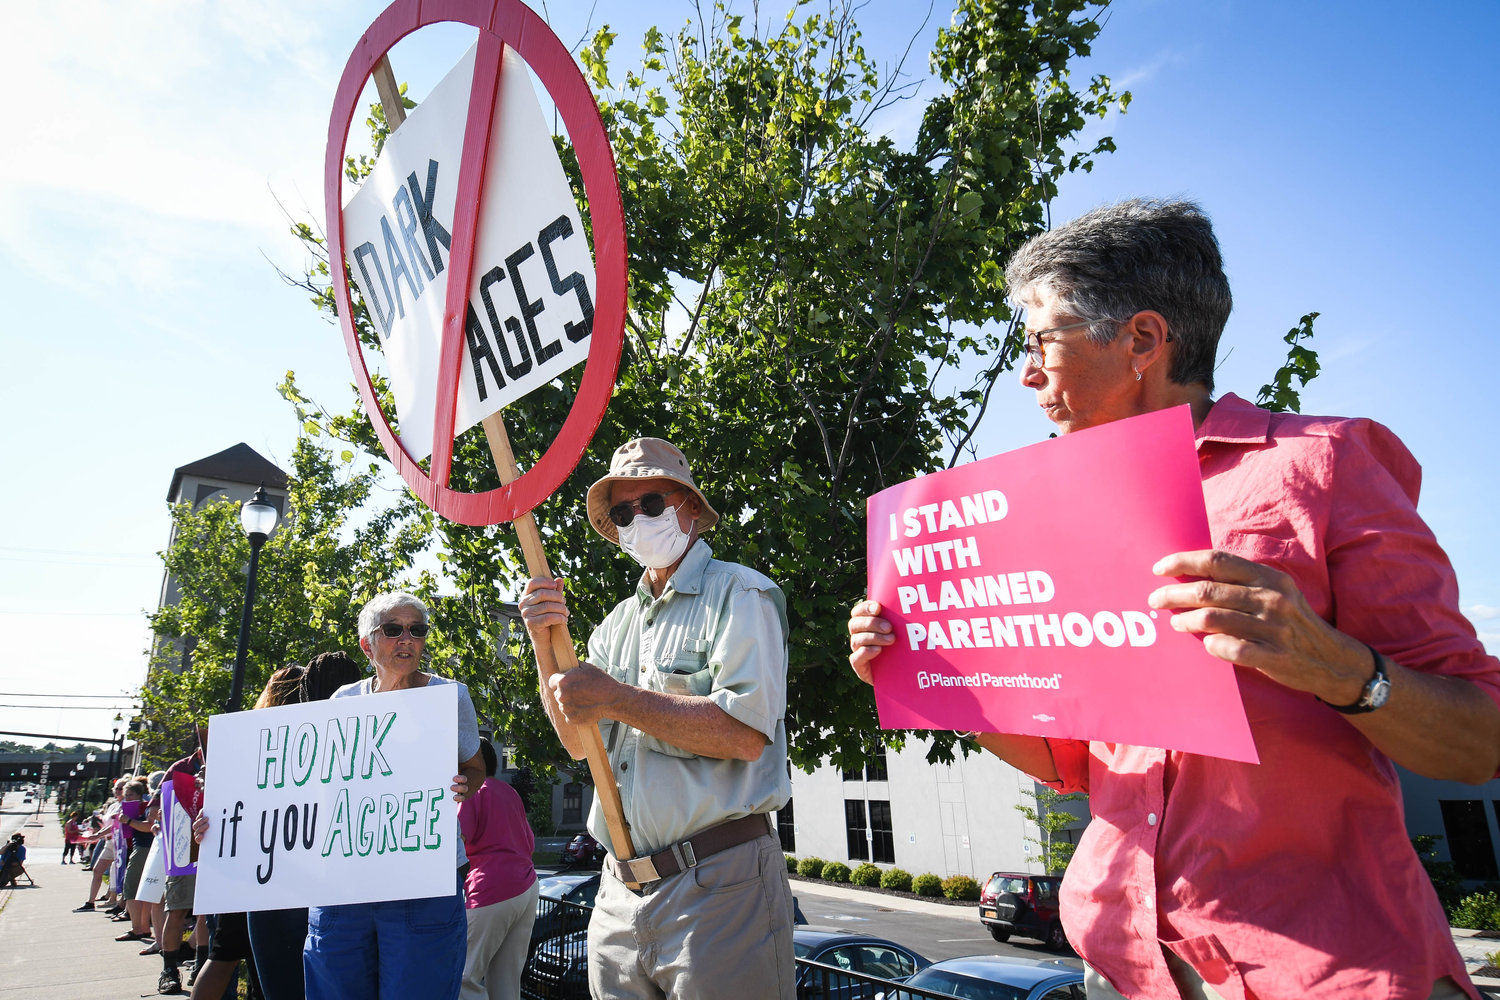 Protestors organize in response to the decision in Dobbs v. Jackson Women’s Health Organization by the Supreme Court on Friday afternoon in front of Rep. Claudia Tenney’s office at 430 Court St. in Utica.